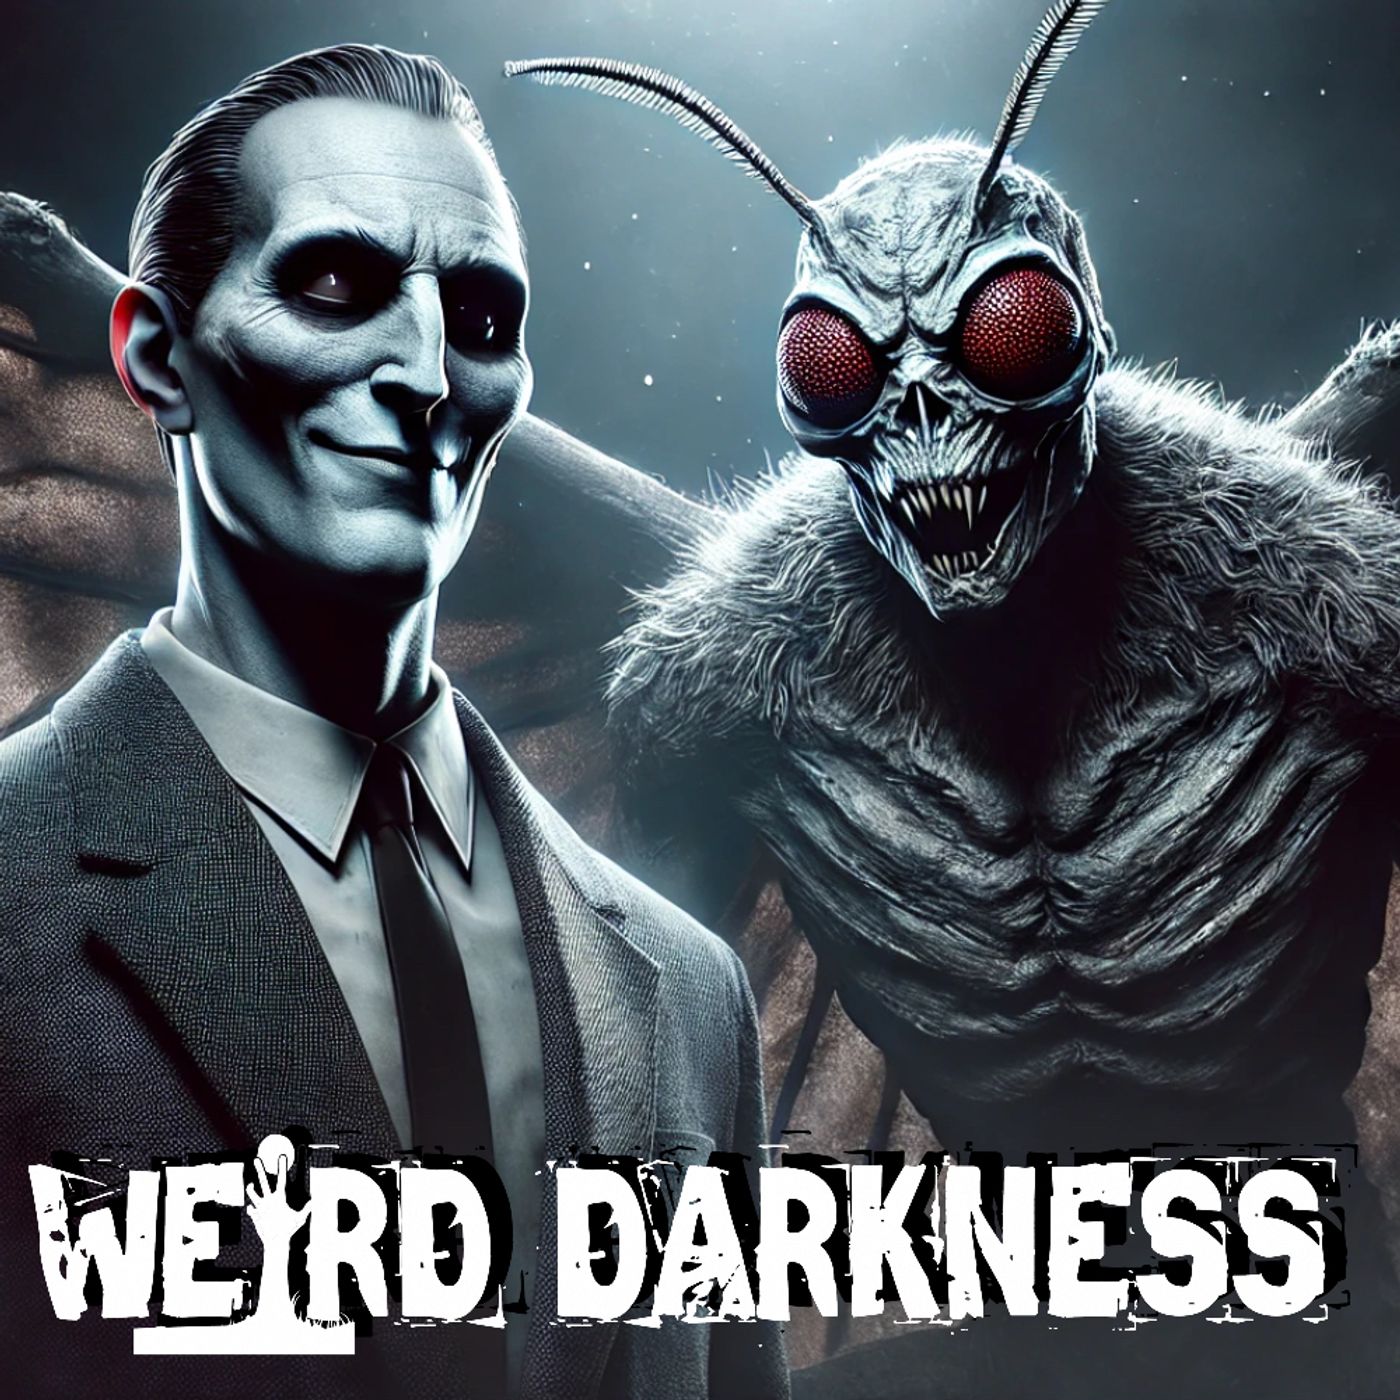 “INDRID COLD: THE GRINNING MAN” and More Terrifying, True Stories! #WeirdDarkness #Darkives